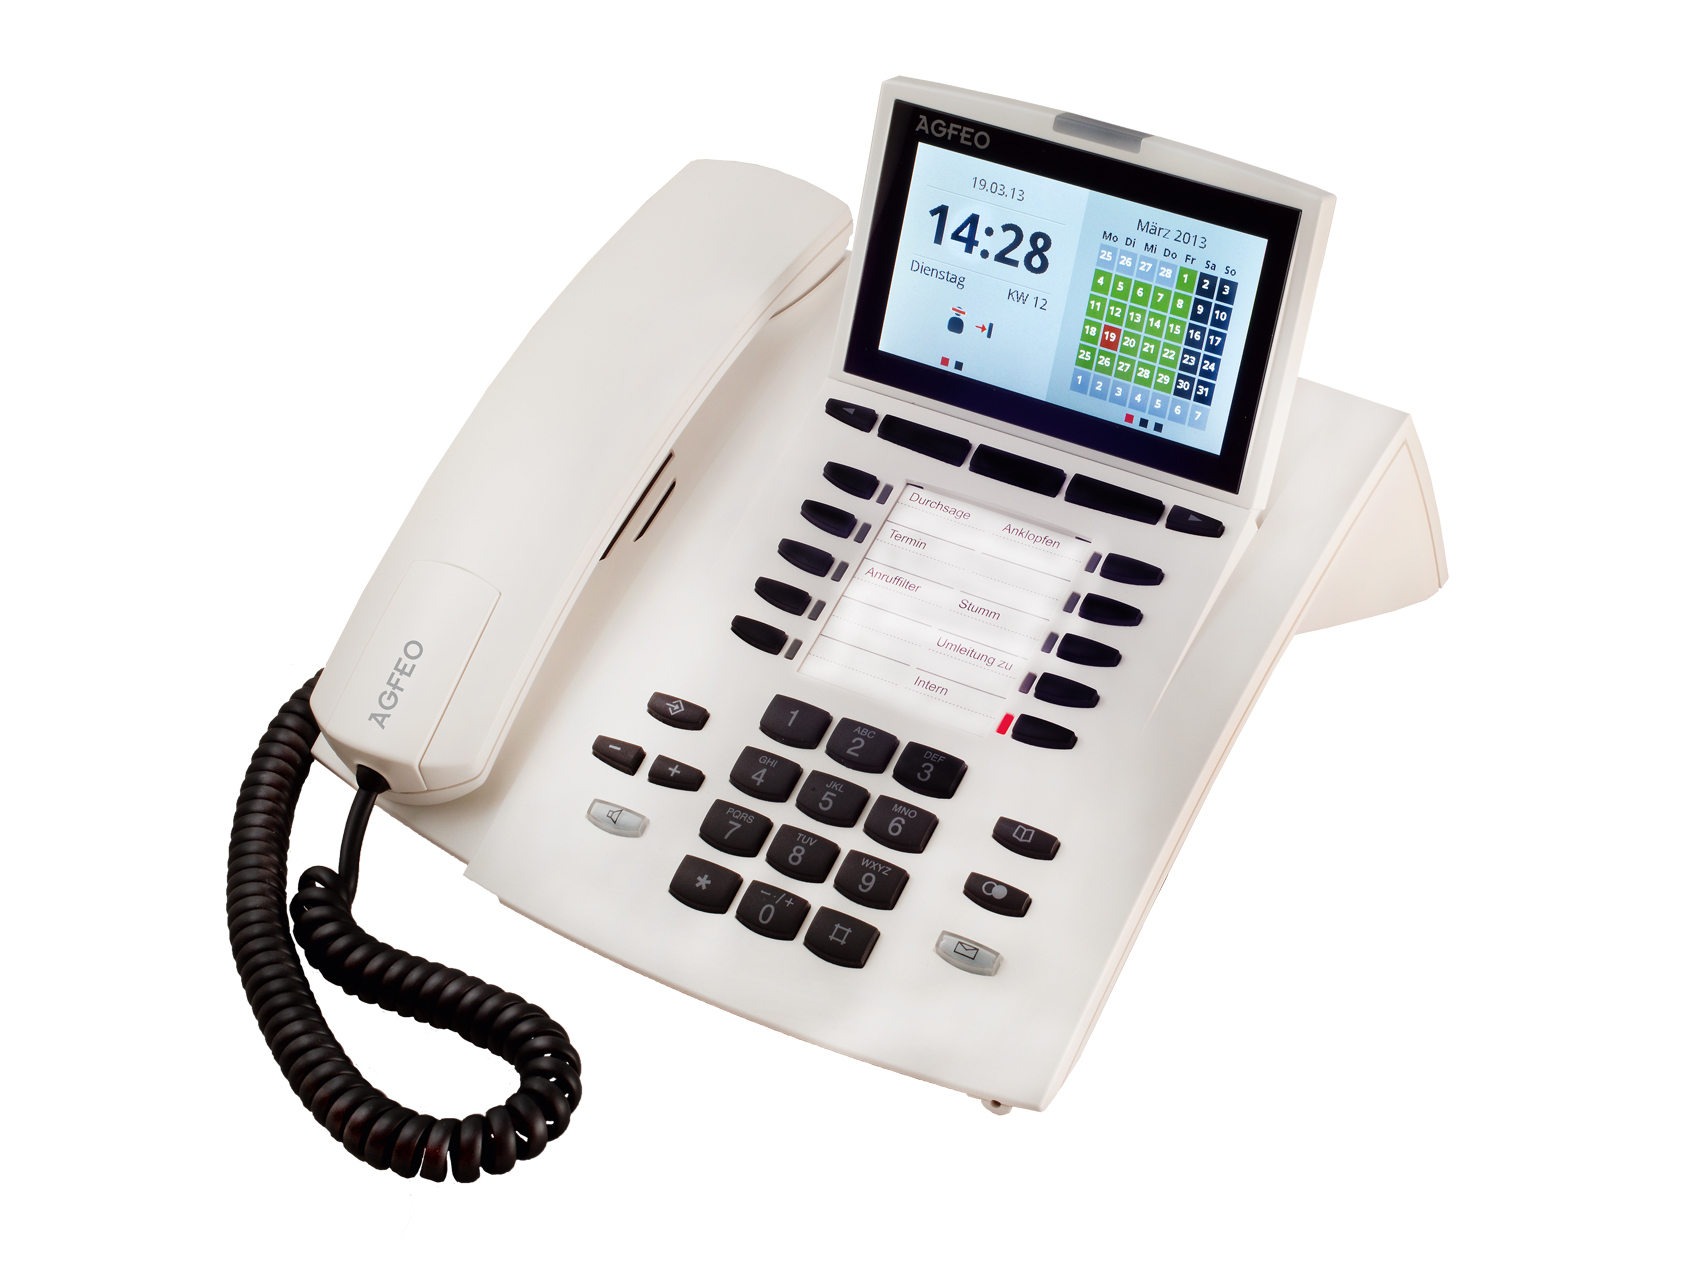 6101324 AGFEO ST 45 IP - IP Phone - White - Wired handset - 1000 entries - Digital - LCD